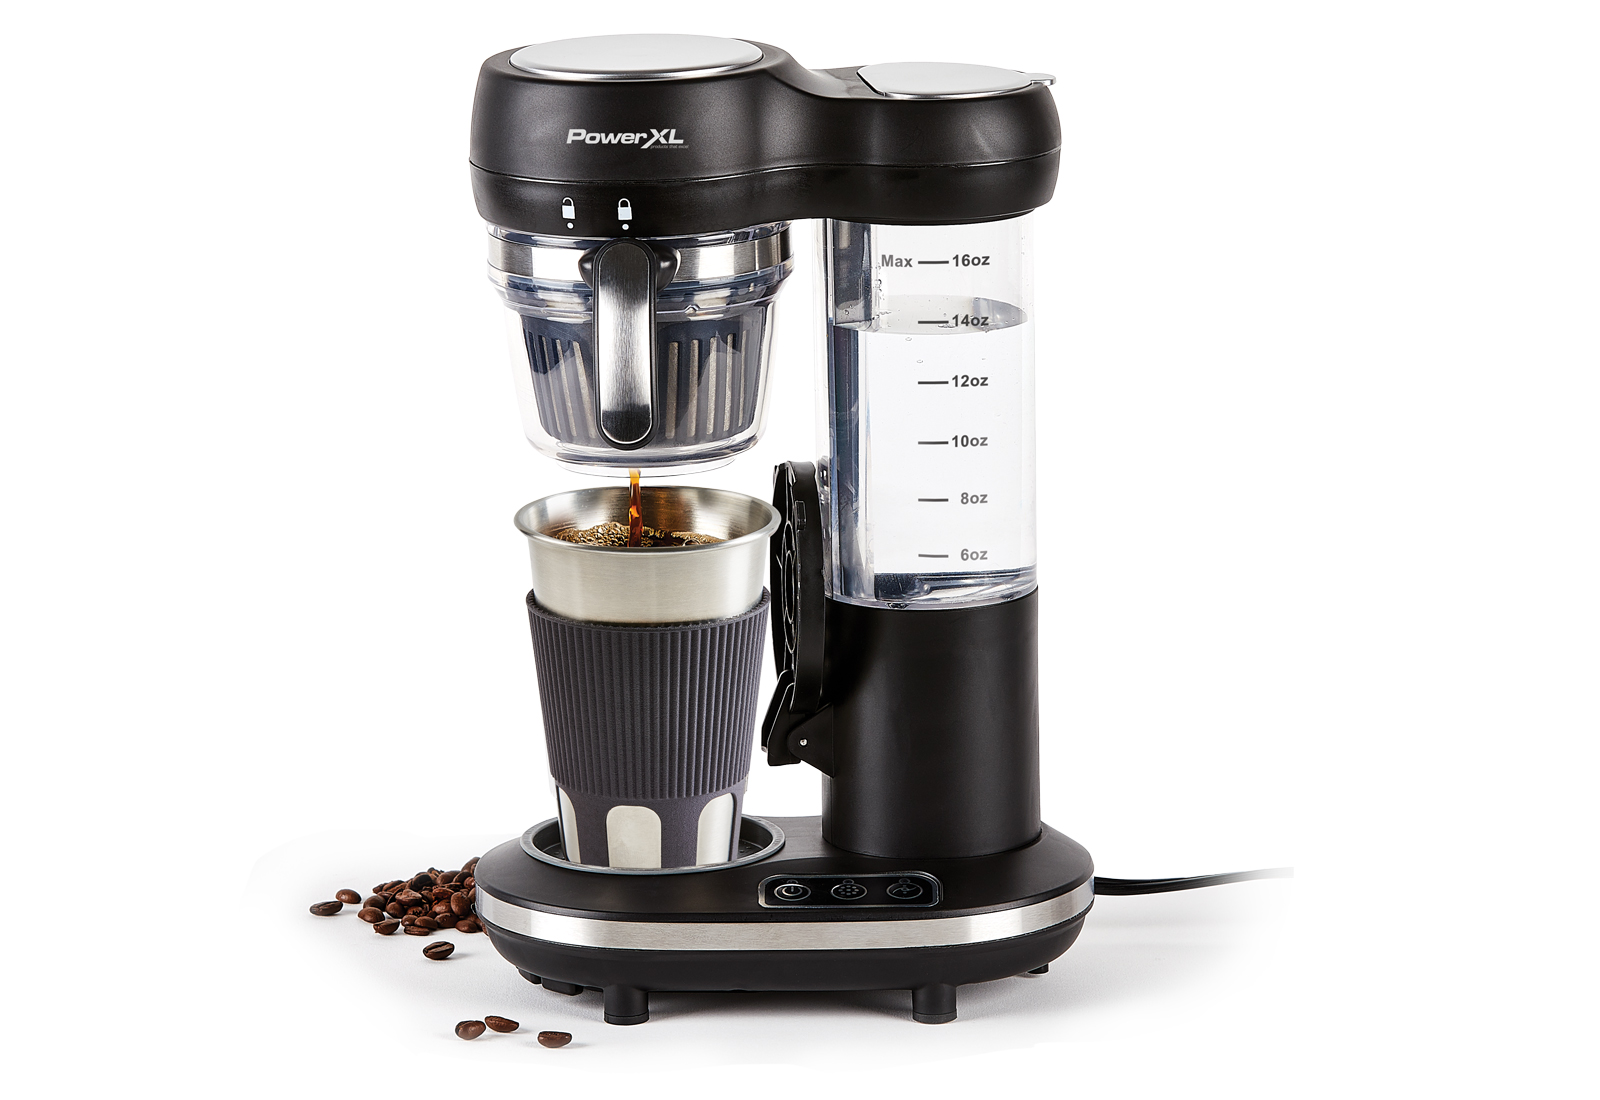 PowerXL Grind & Go Coffee Maker Product Image